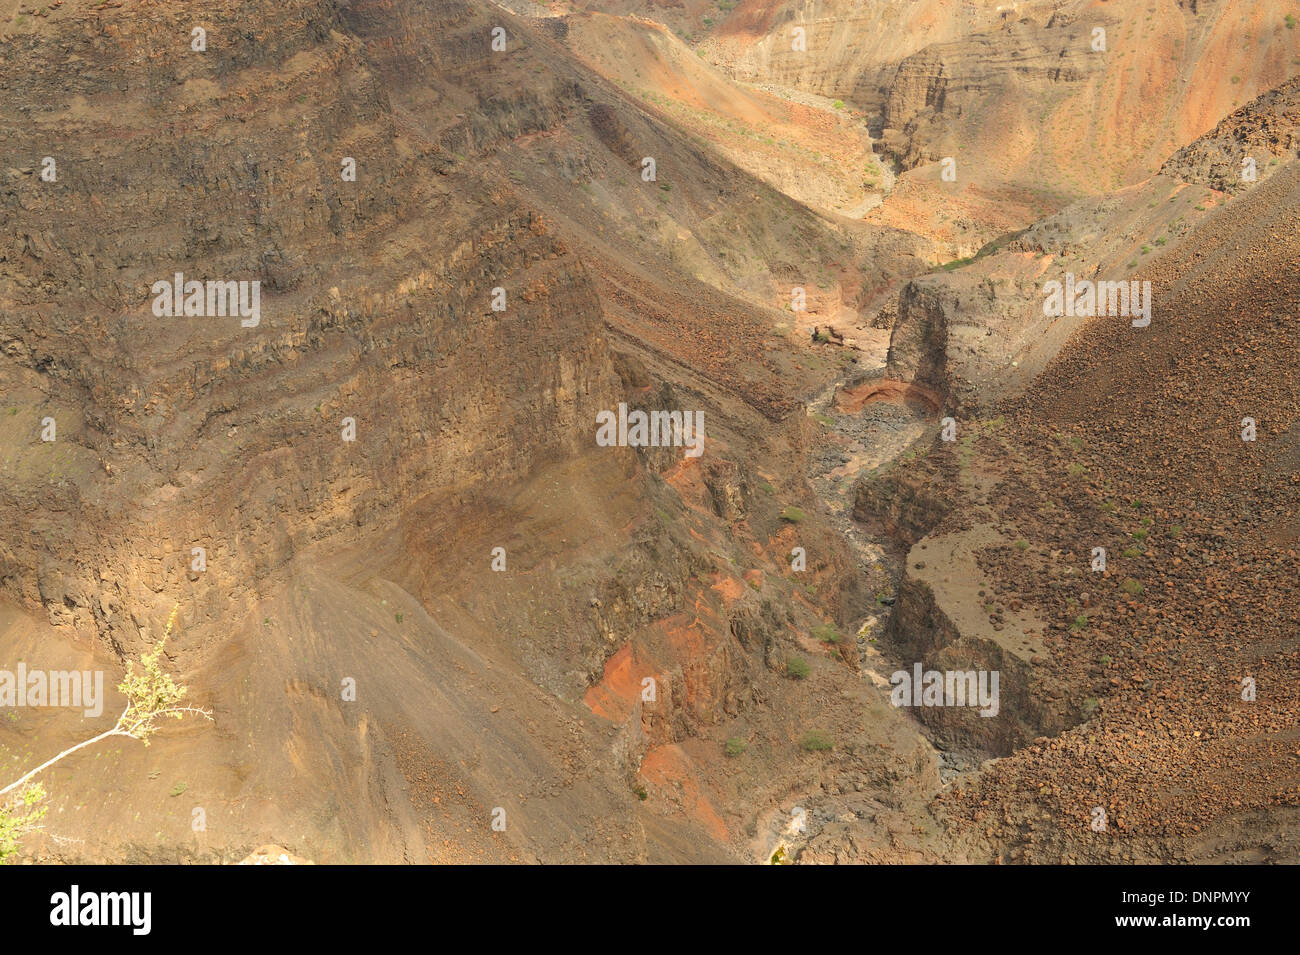 View from the top of Asal-Ghoubbet rift, Djibouti, Horn of Africa Stock Photo